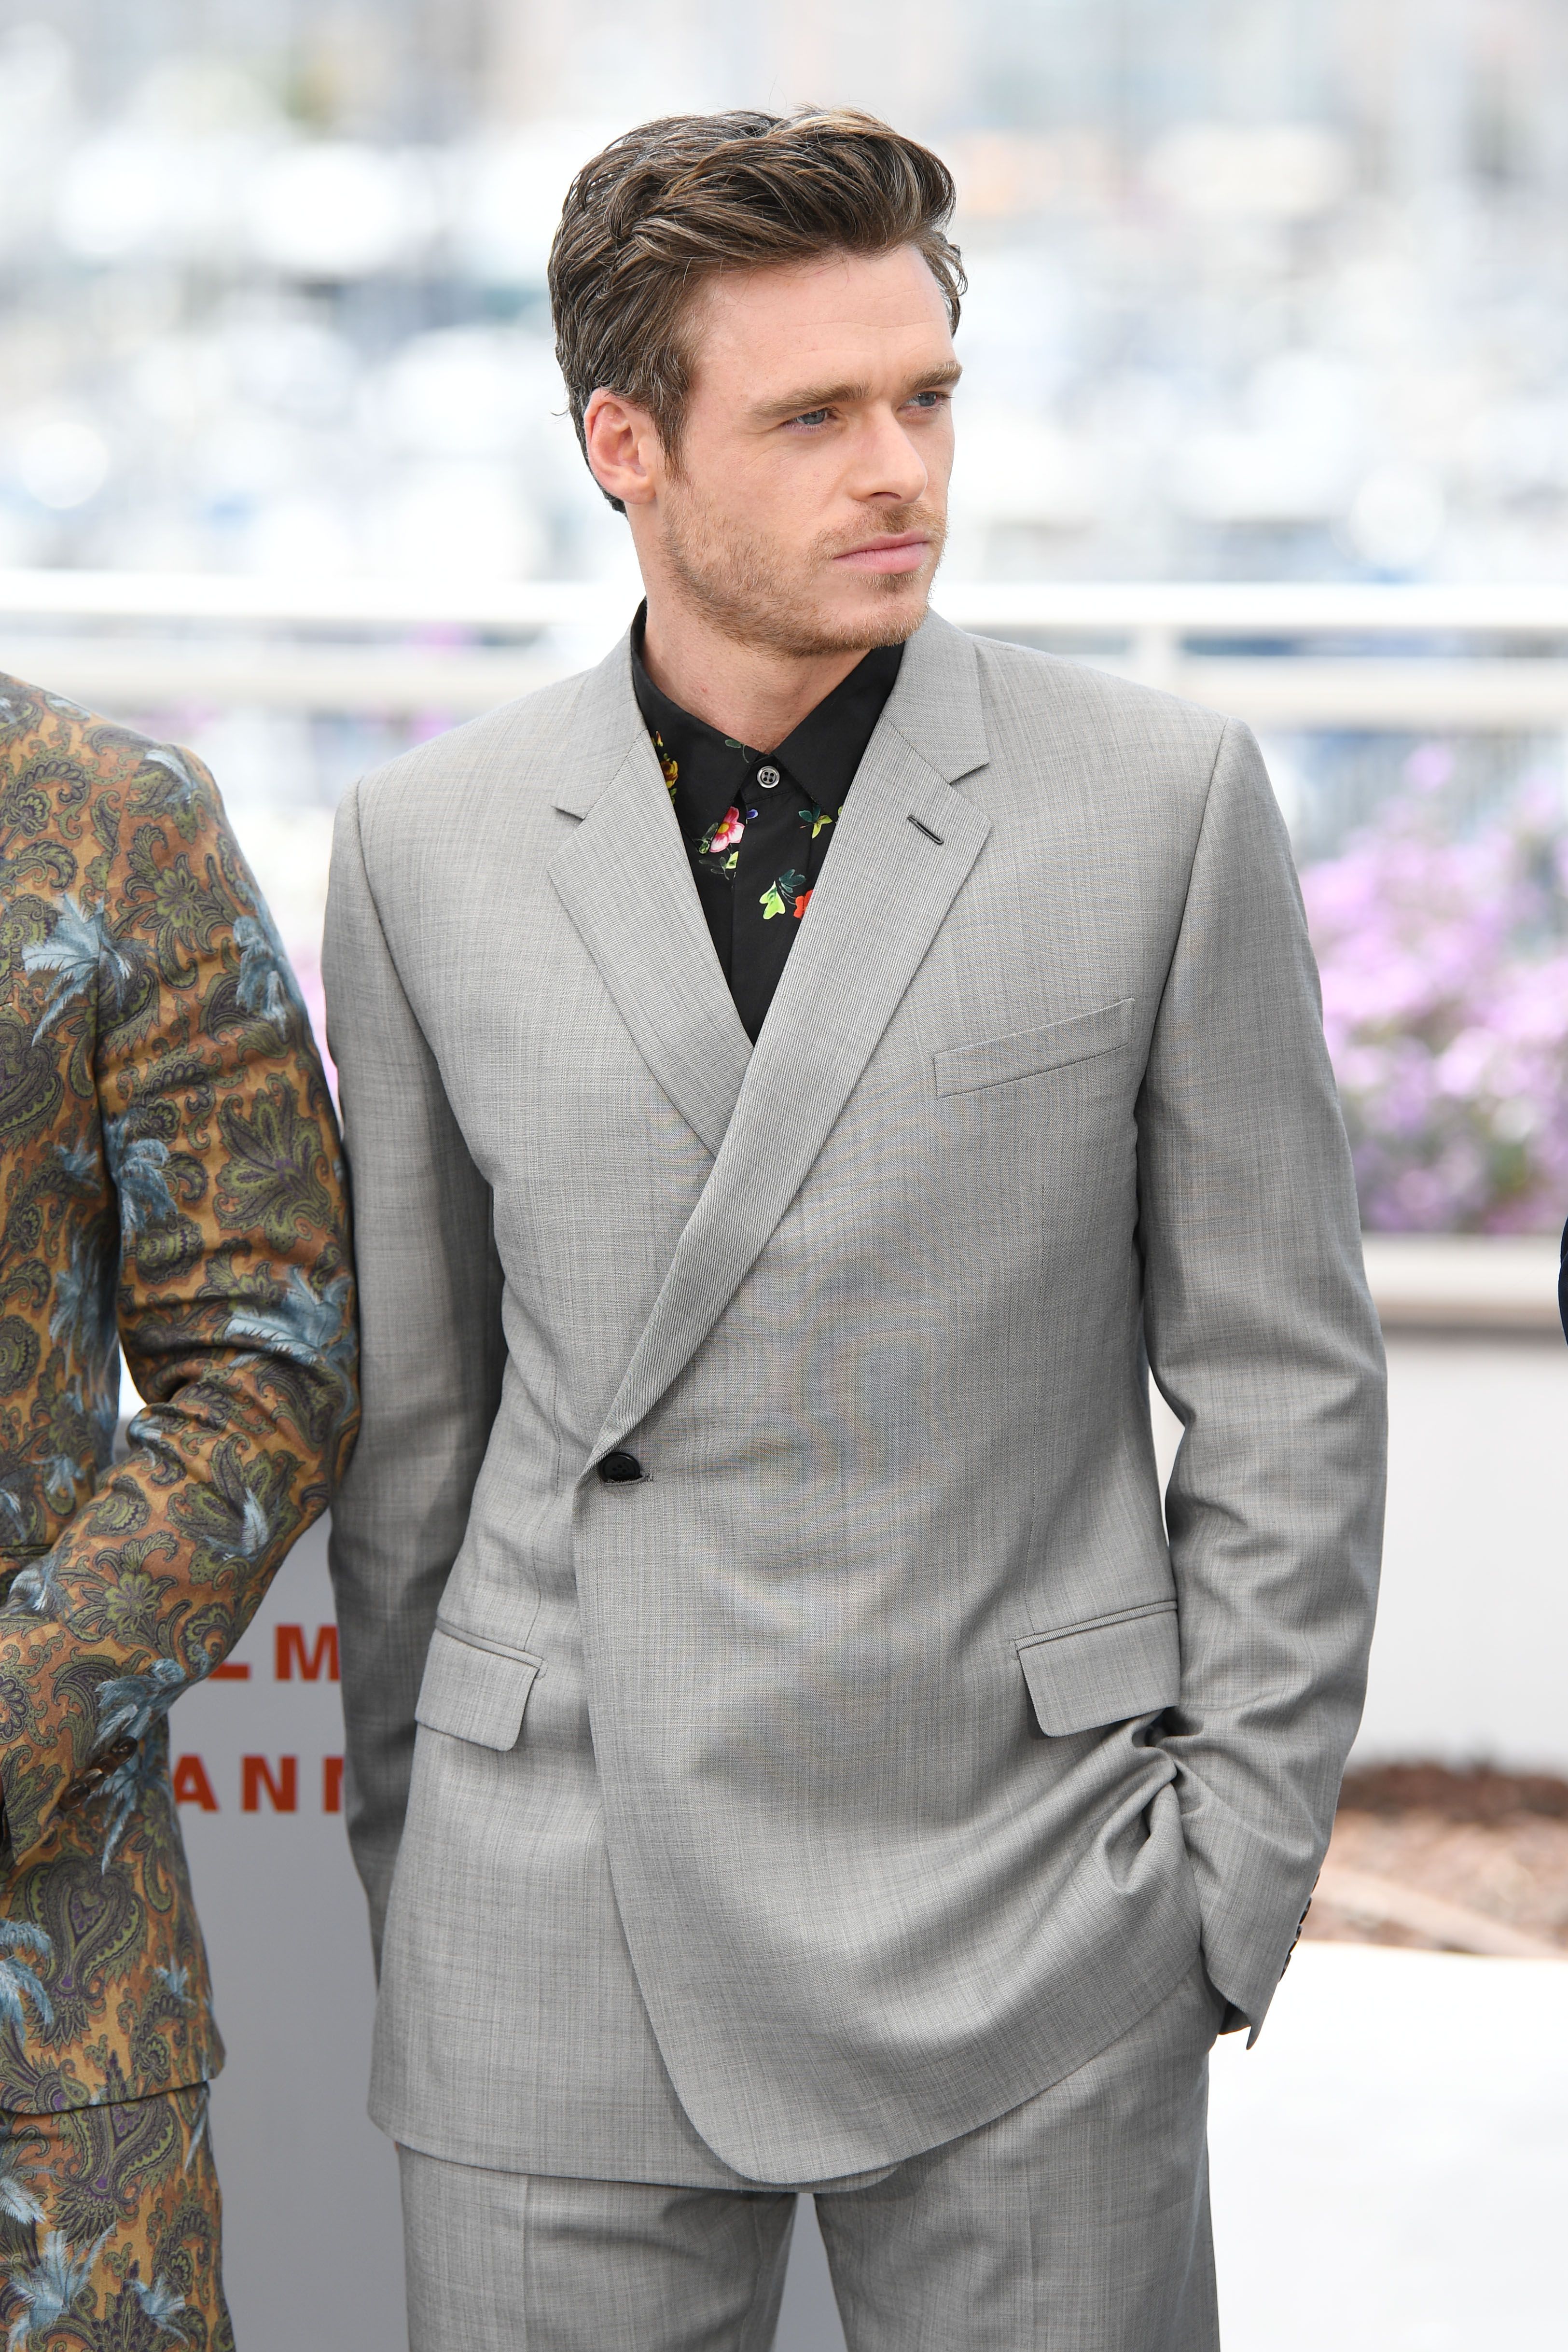 Cannes Film Festival: I'm Obsessed With These Chic Men's Blouses